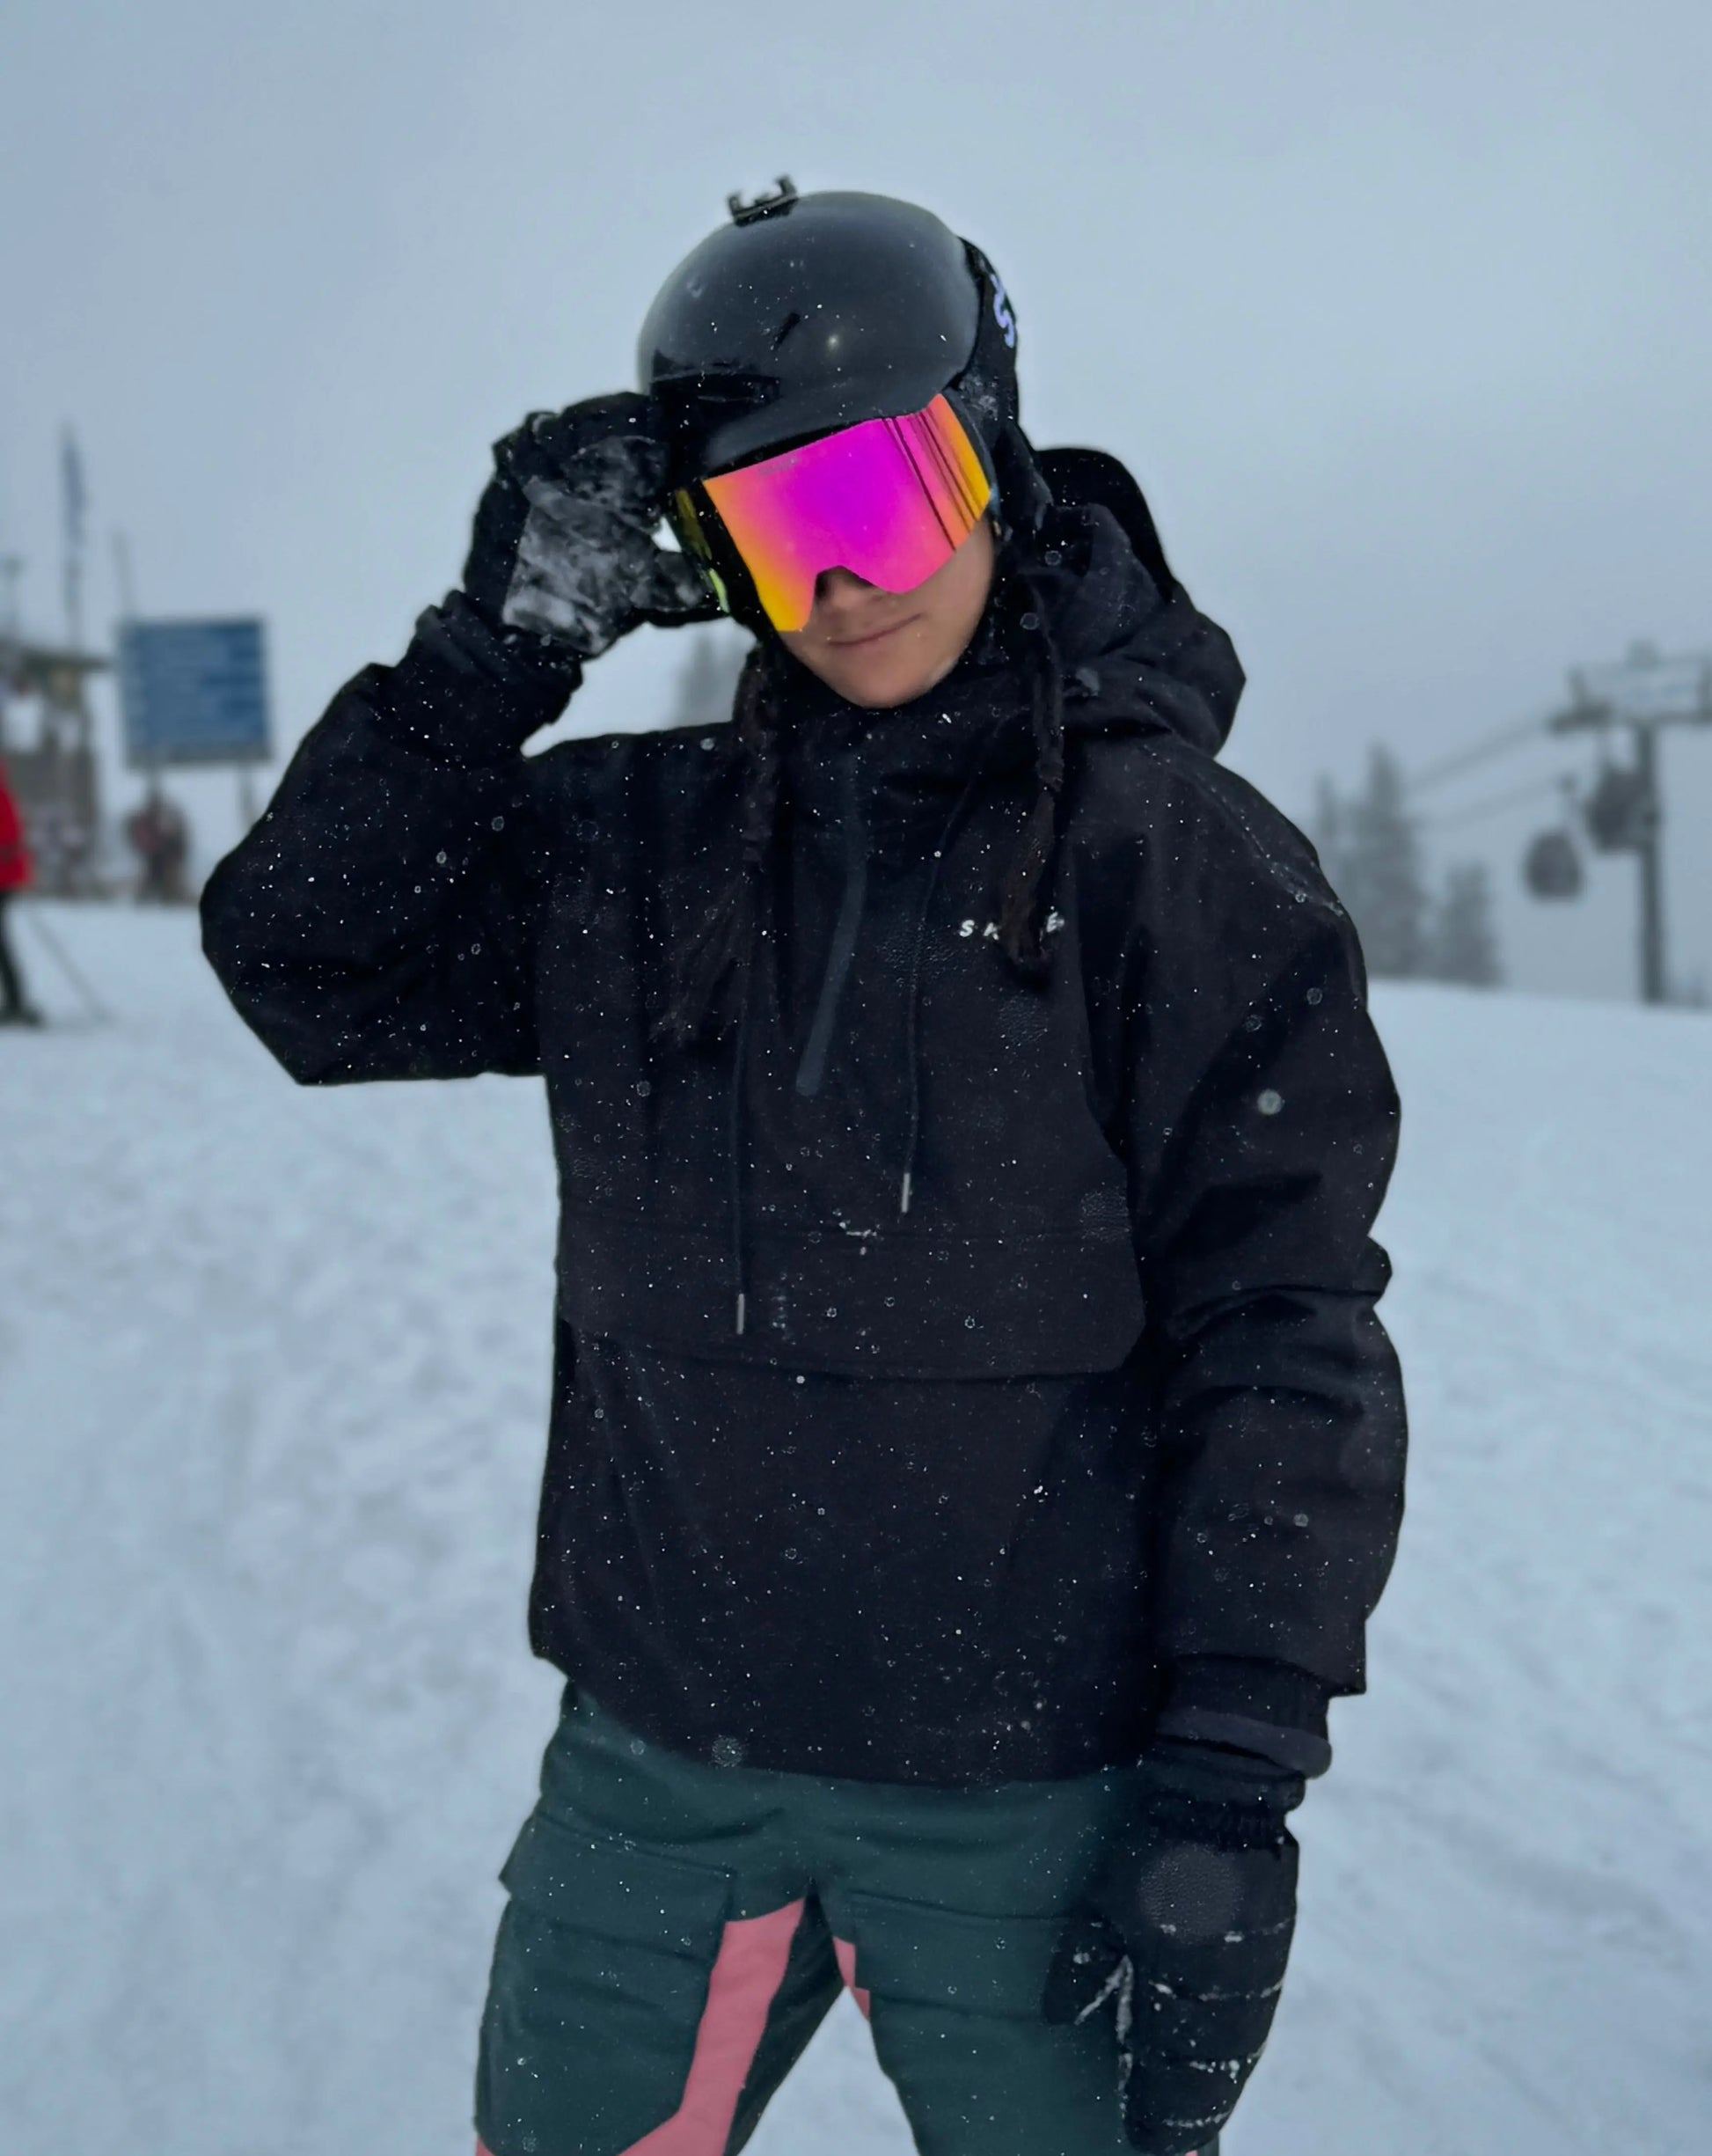 a woman in a black jacket and goggles on a ski slope